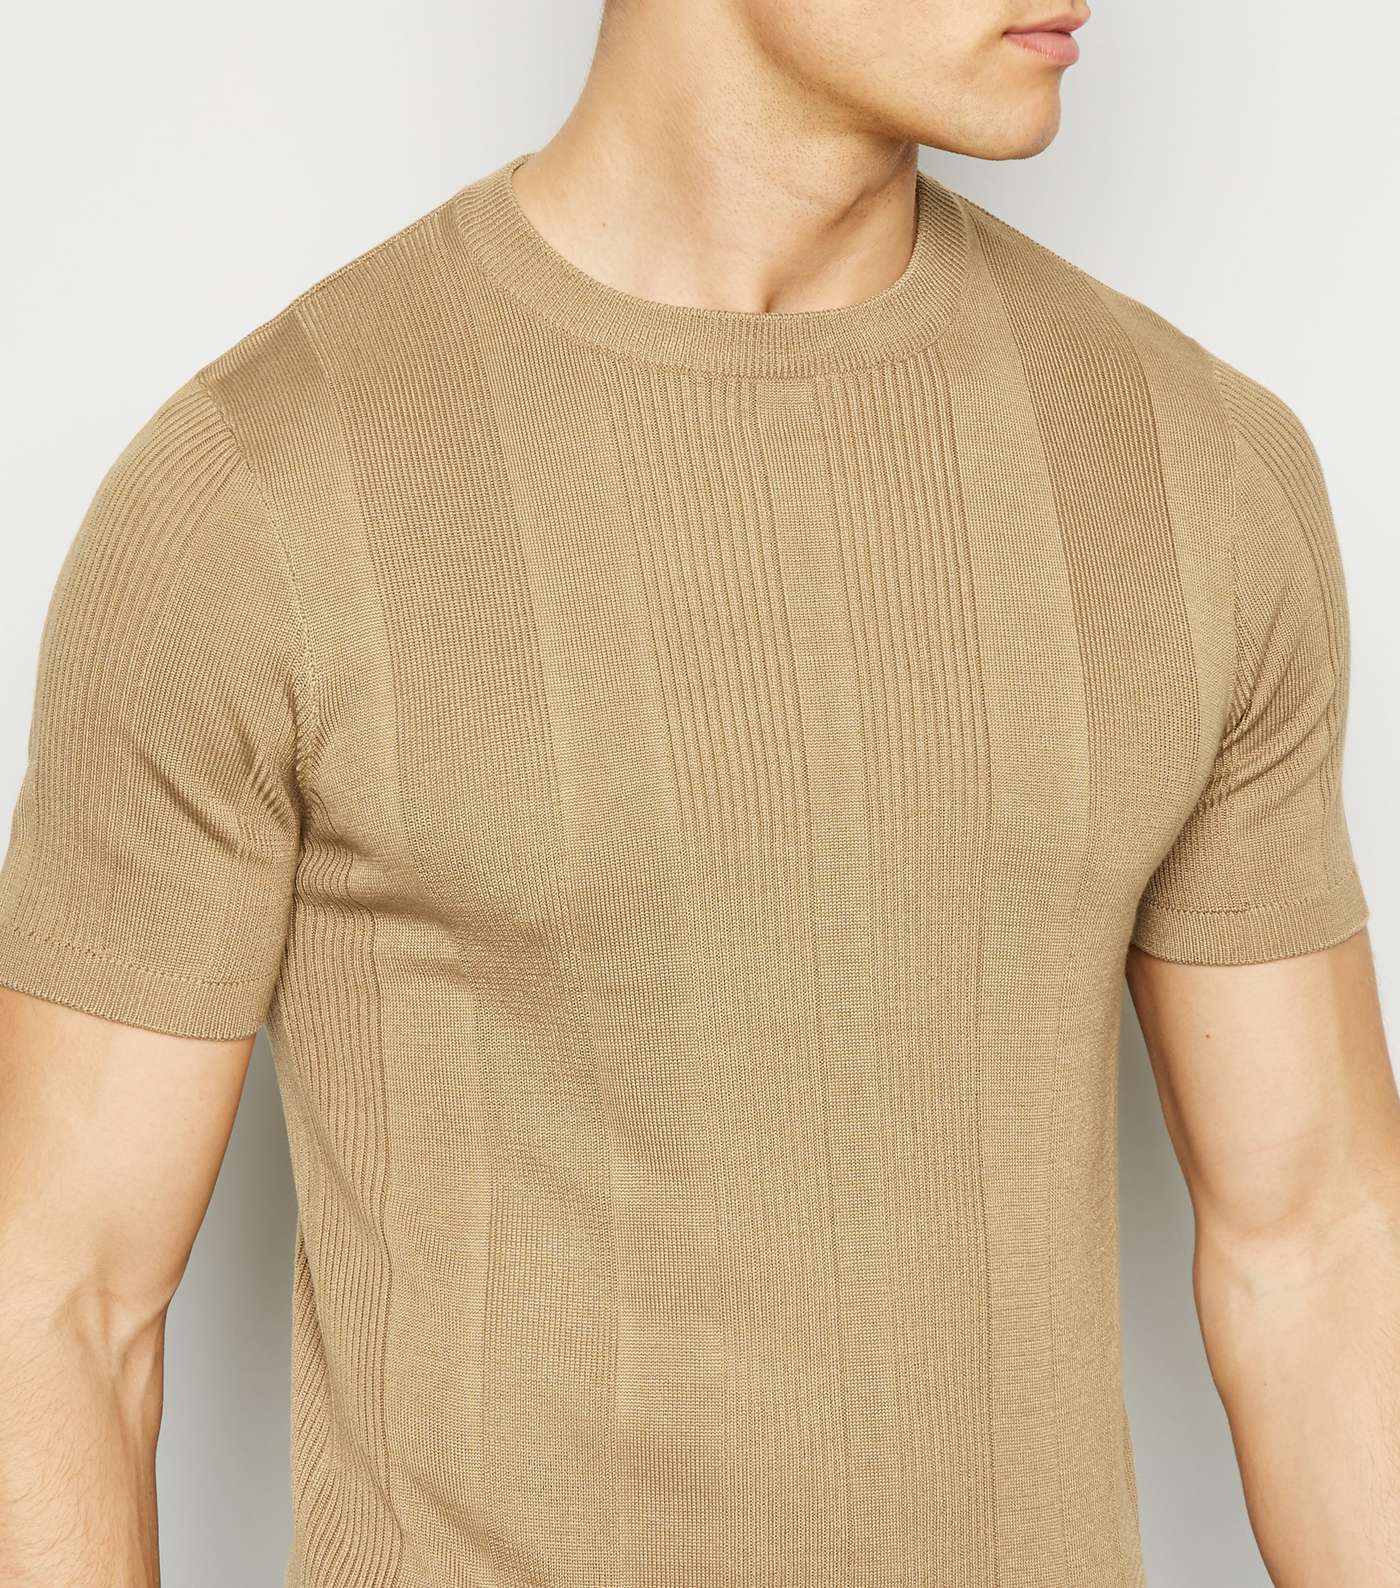 Brown Knit Short Sleeve Muscle Fit T-Shirt Image 5